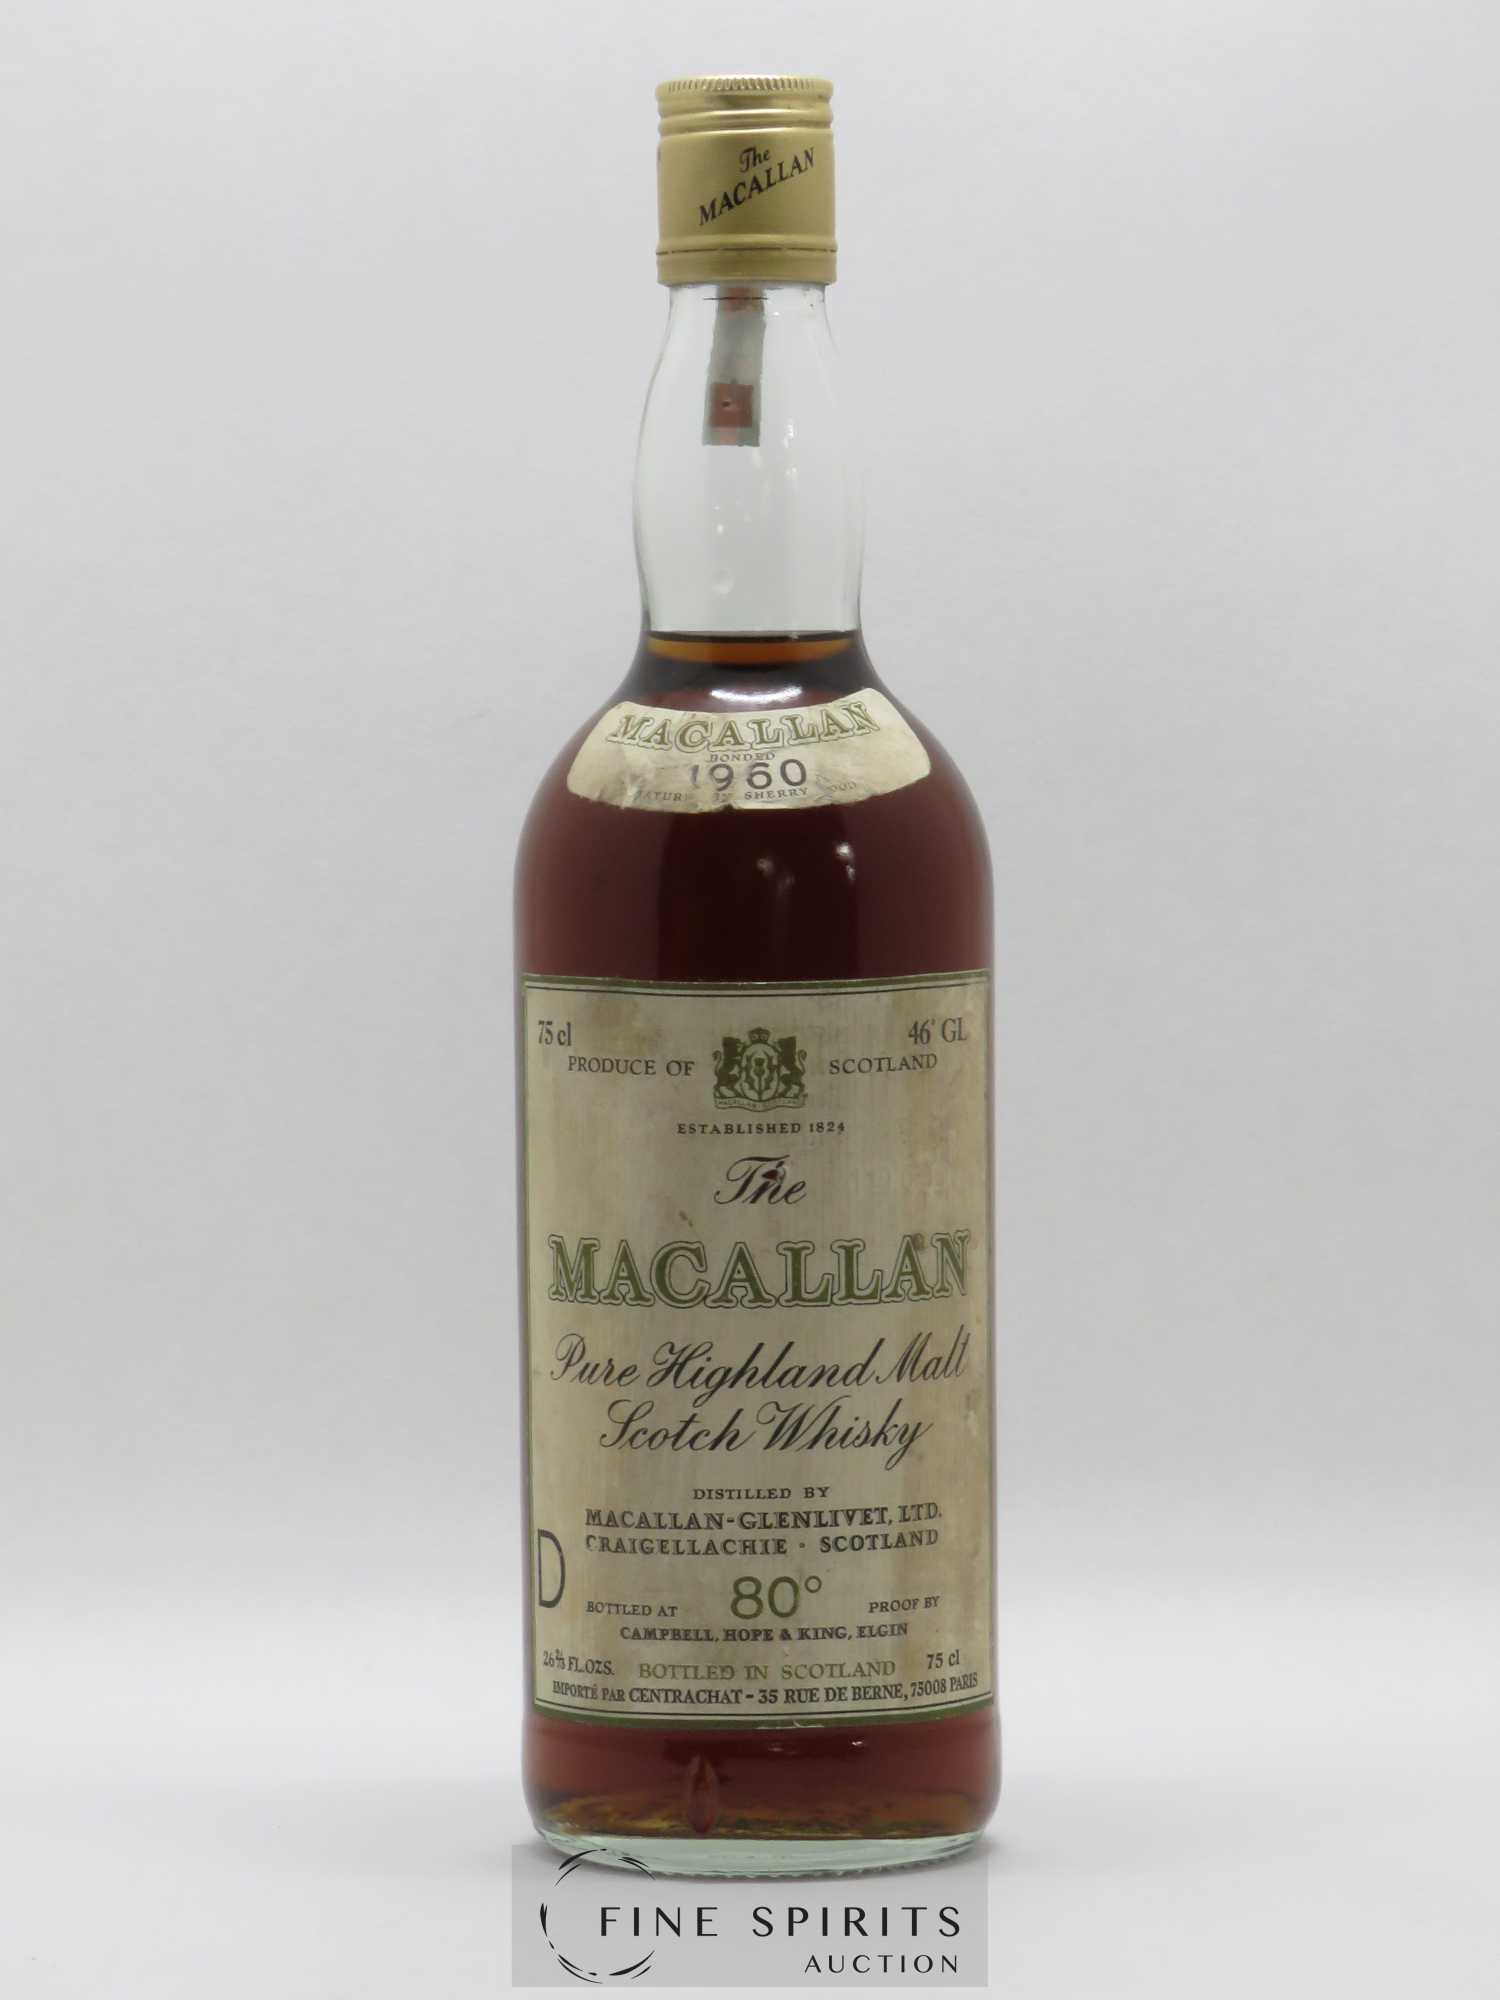 Macallan (The) 1960 Campbell, Hope and King, Elgin Sherry Wood Matured Import by Centrachat, Paris bottled at 80° Proof 